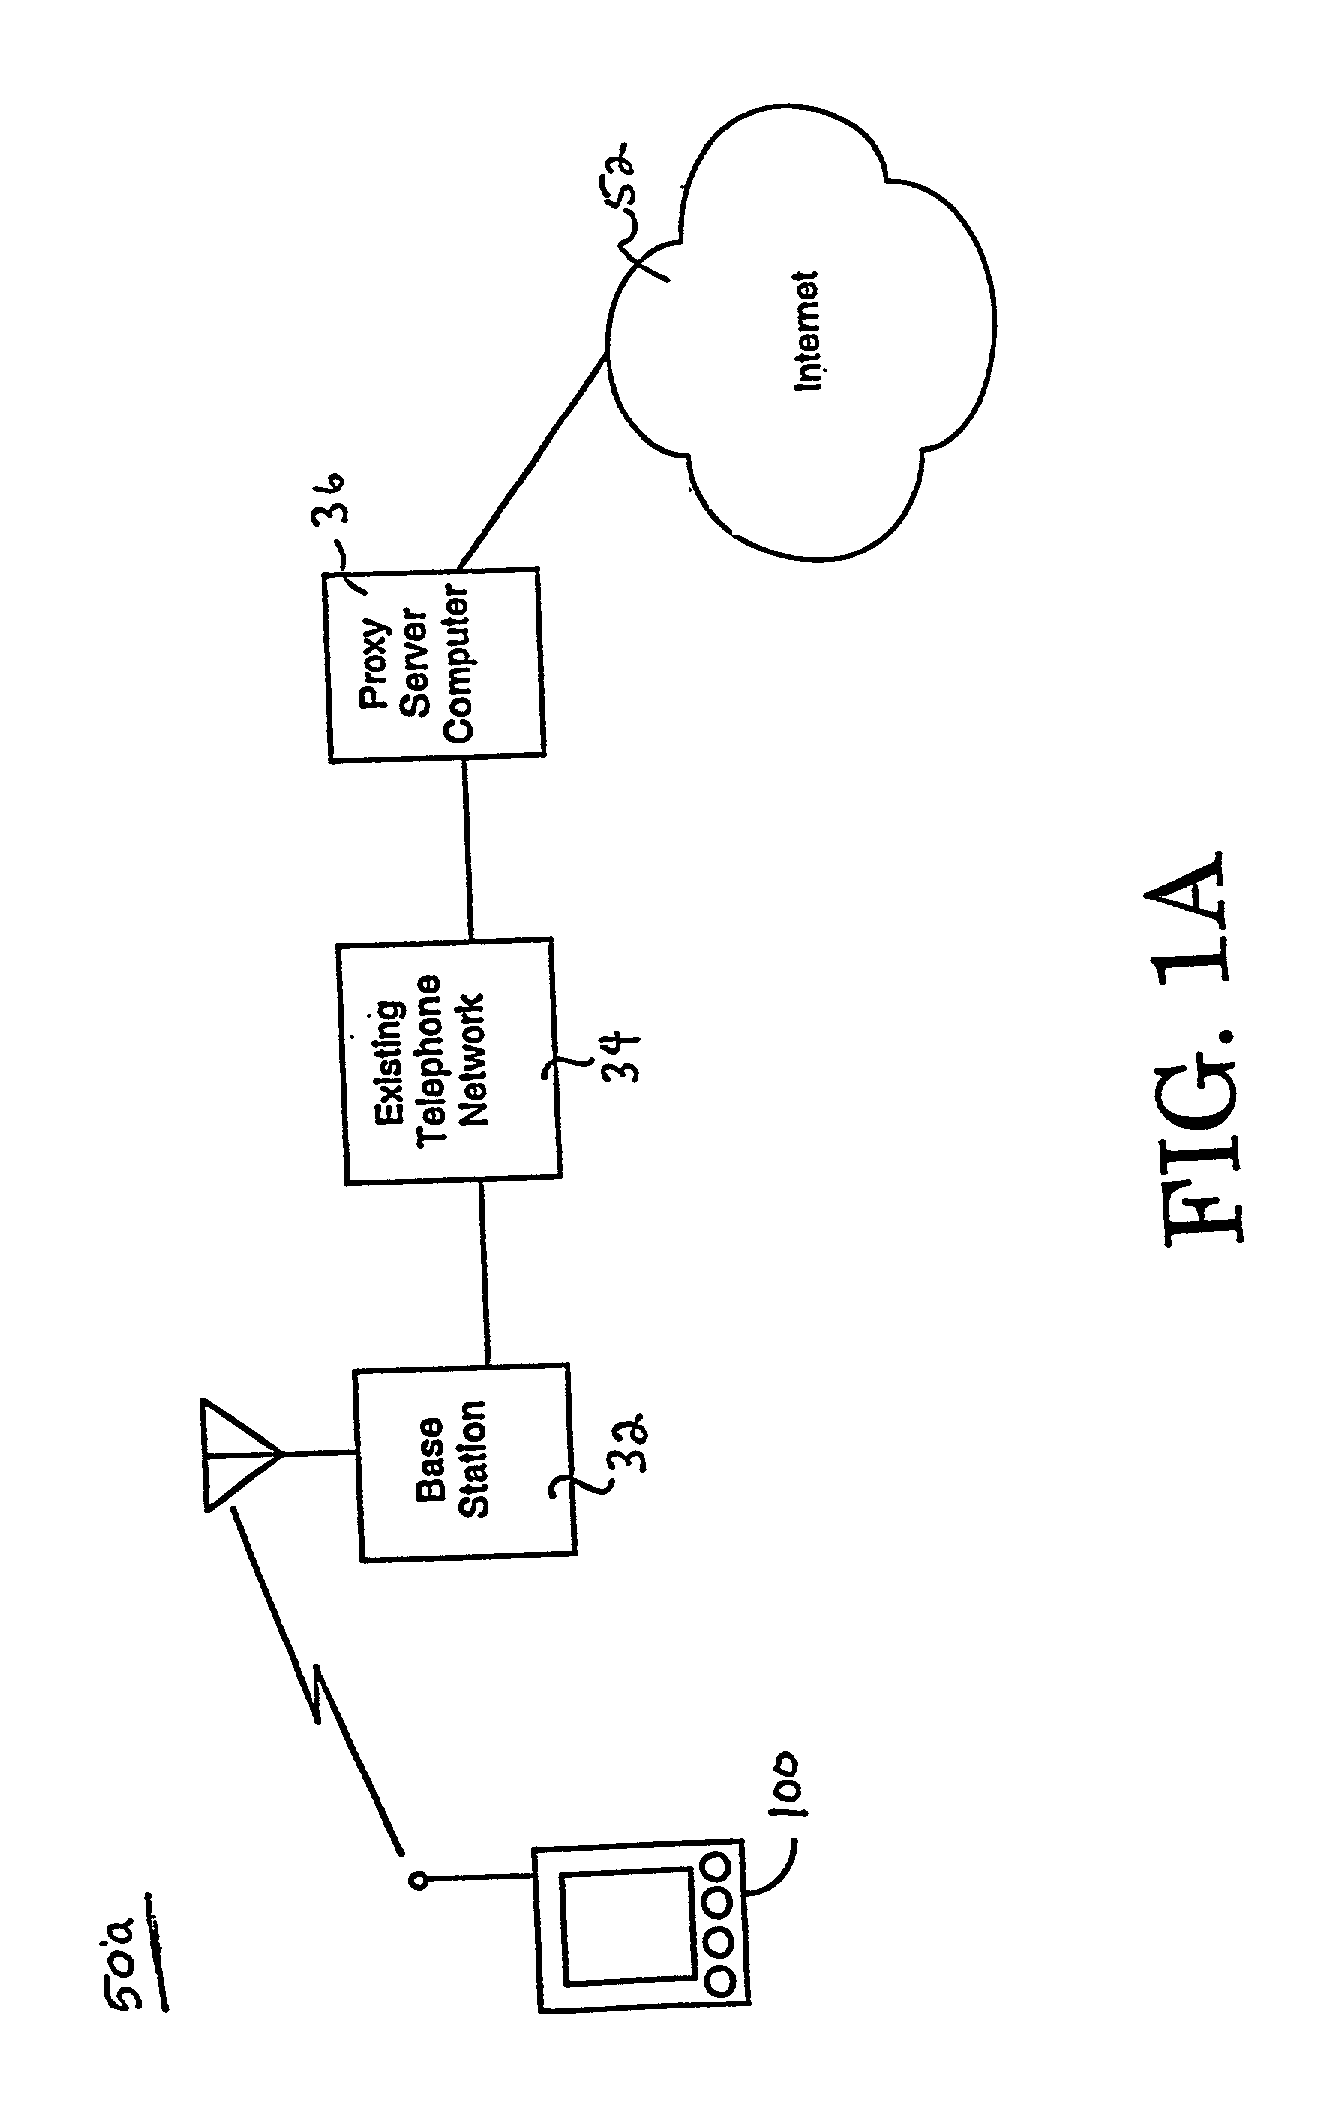 Method and system for using tokens to conduct file sharing transactions between handhelds and a web service